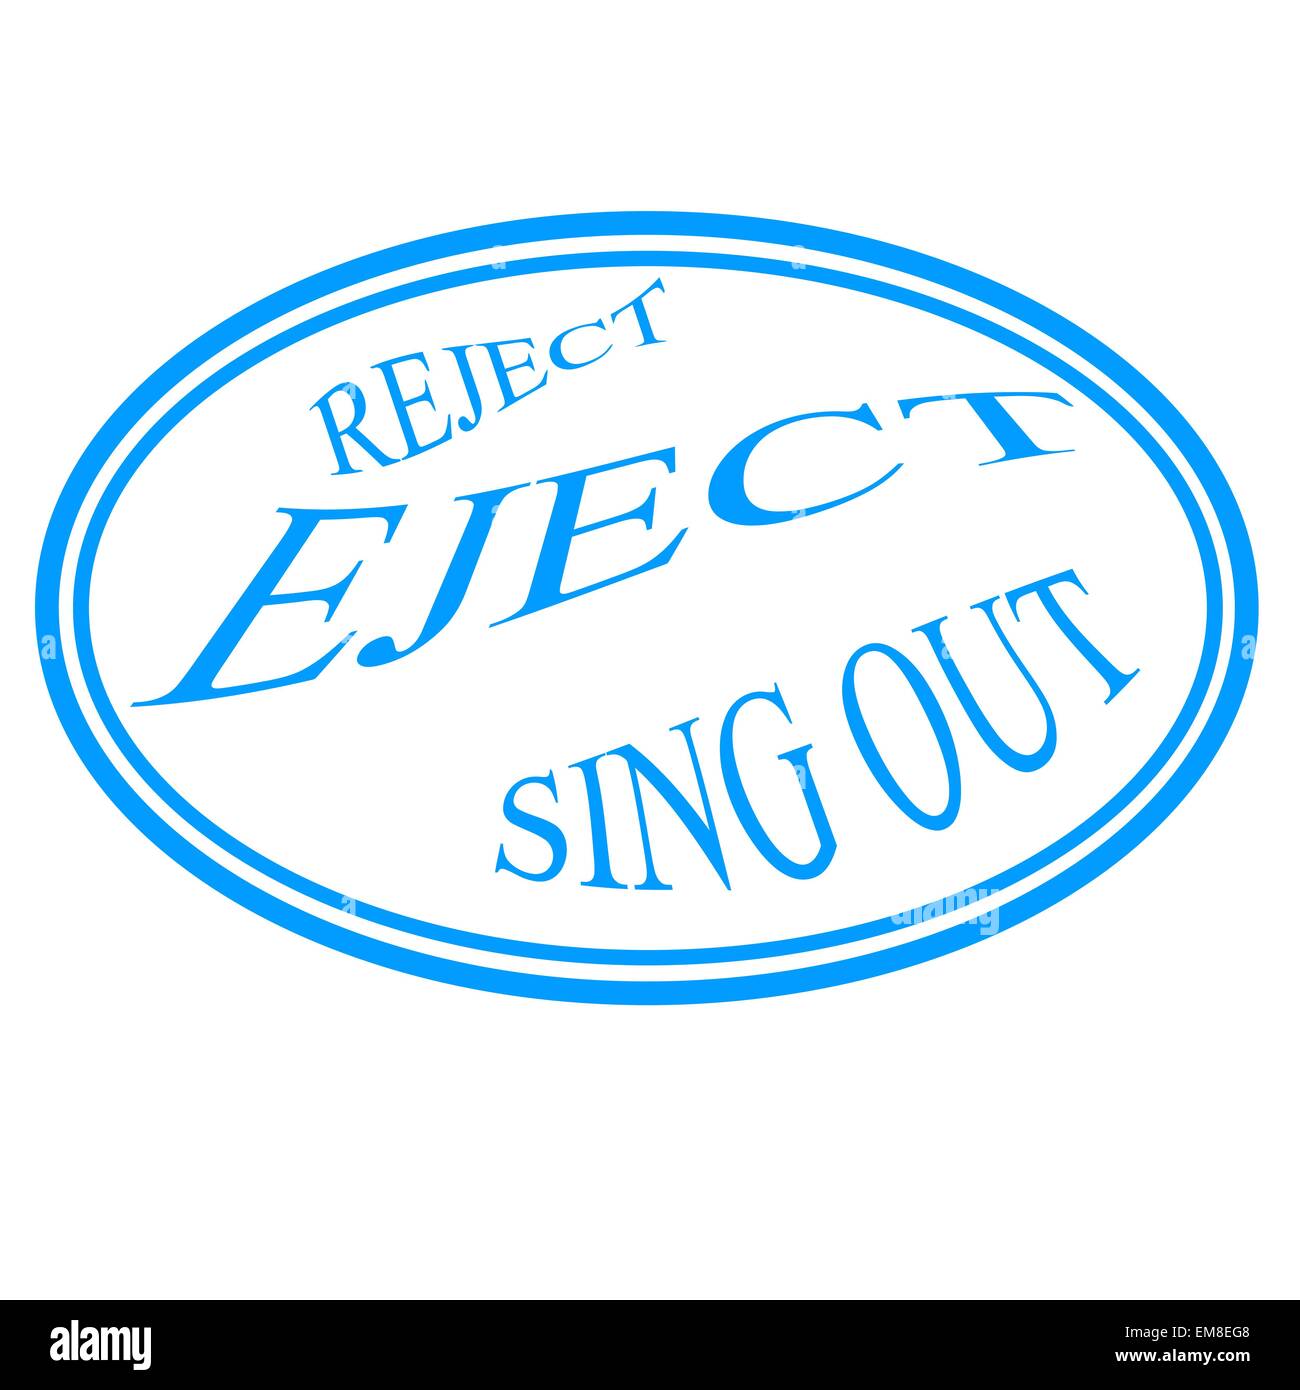 Reject eject and sing out Stock Vector